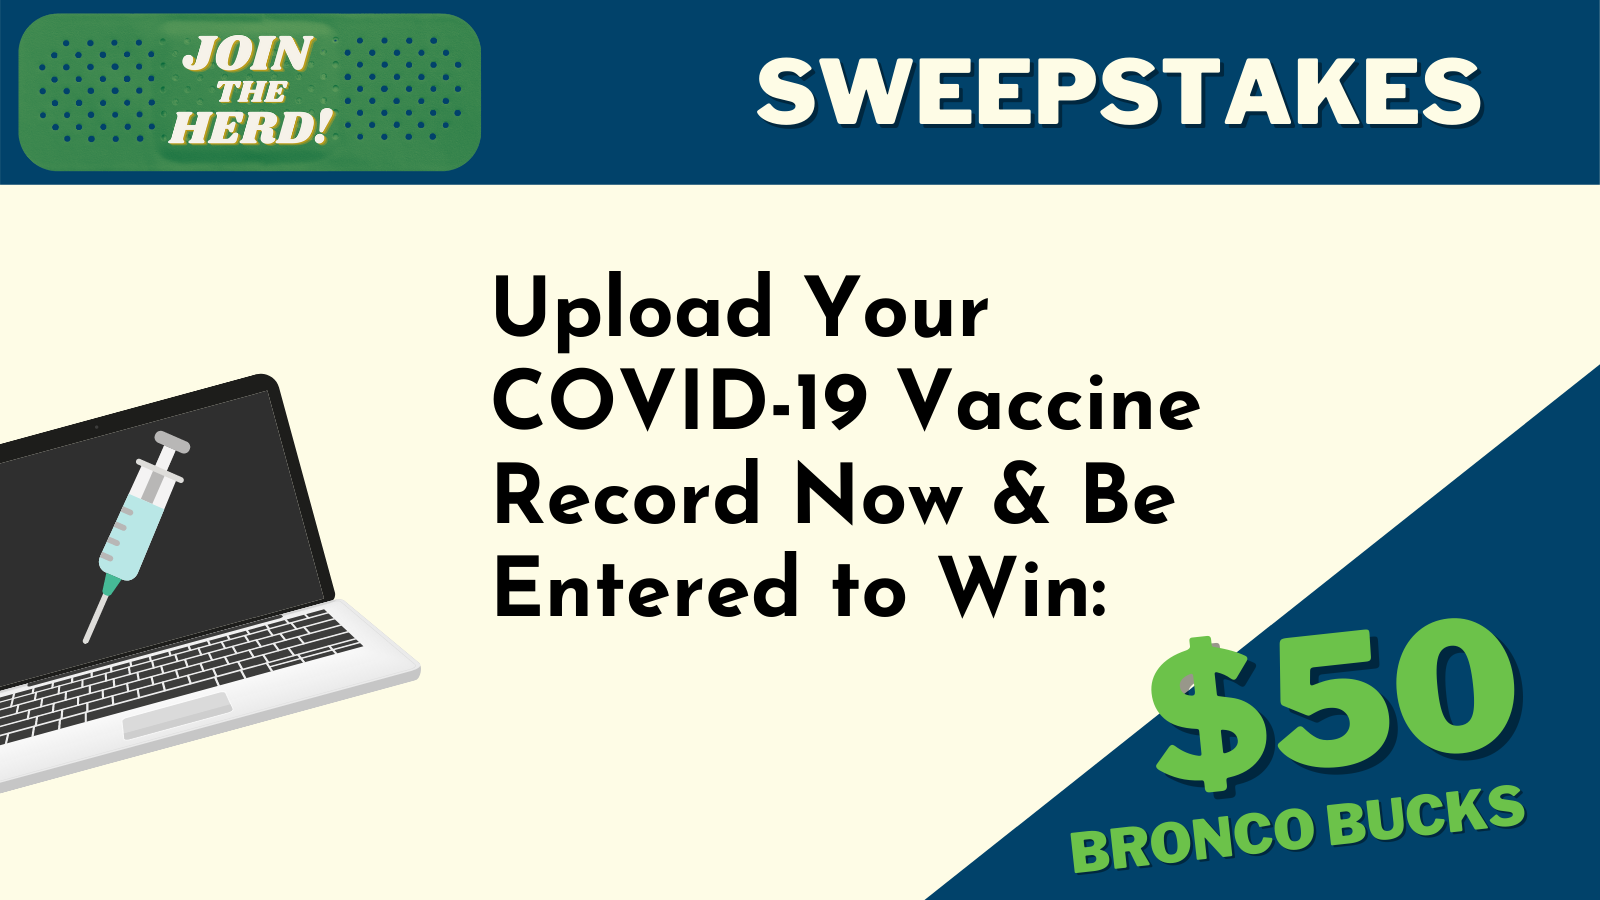 Upload your COVID-19 Vaccine Record now and be entered to win $50 Bronco Bucks